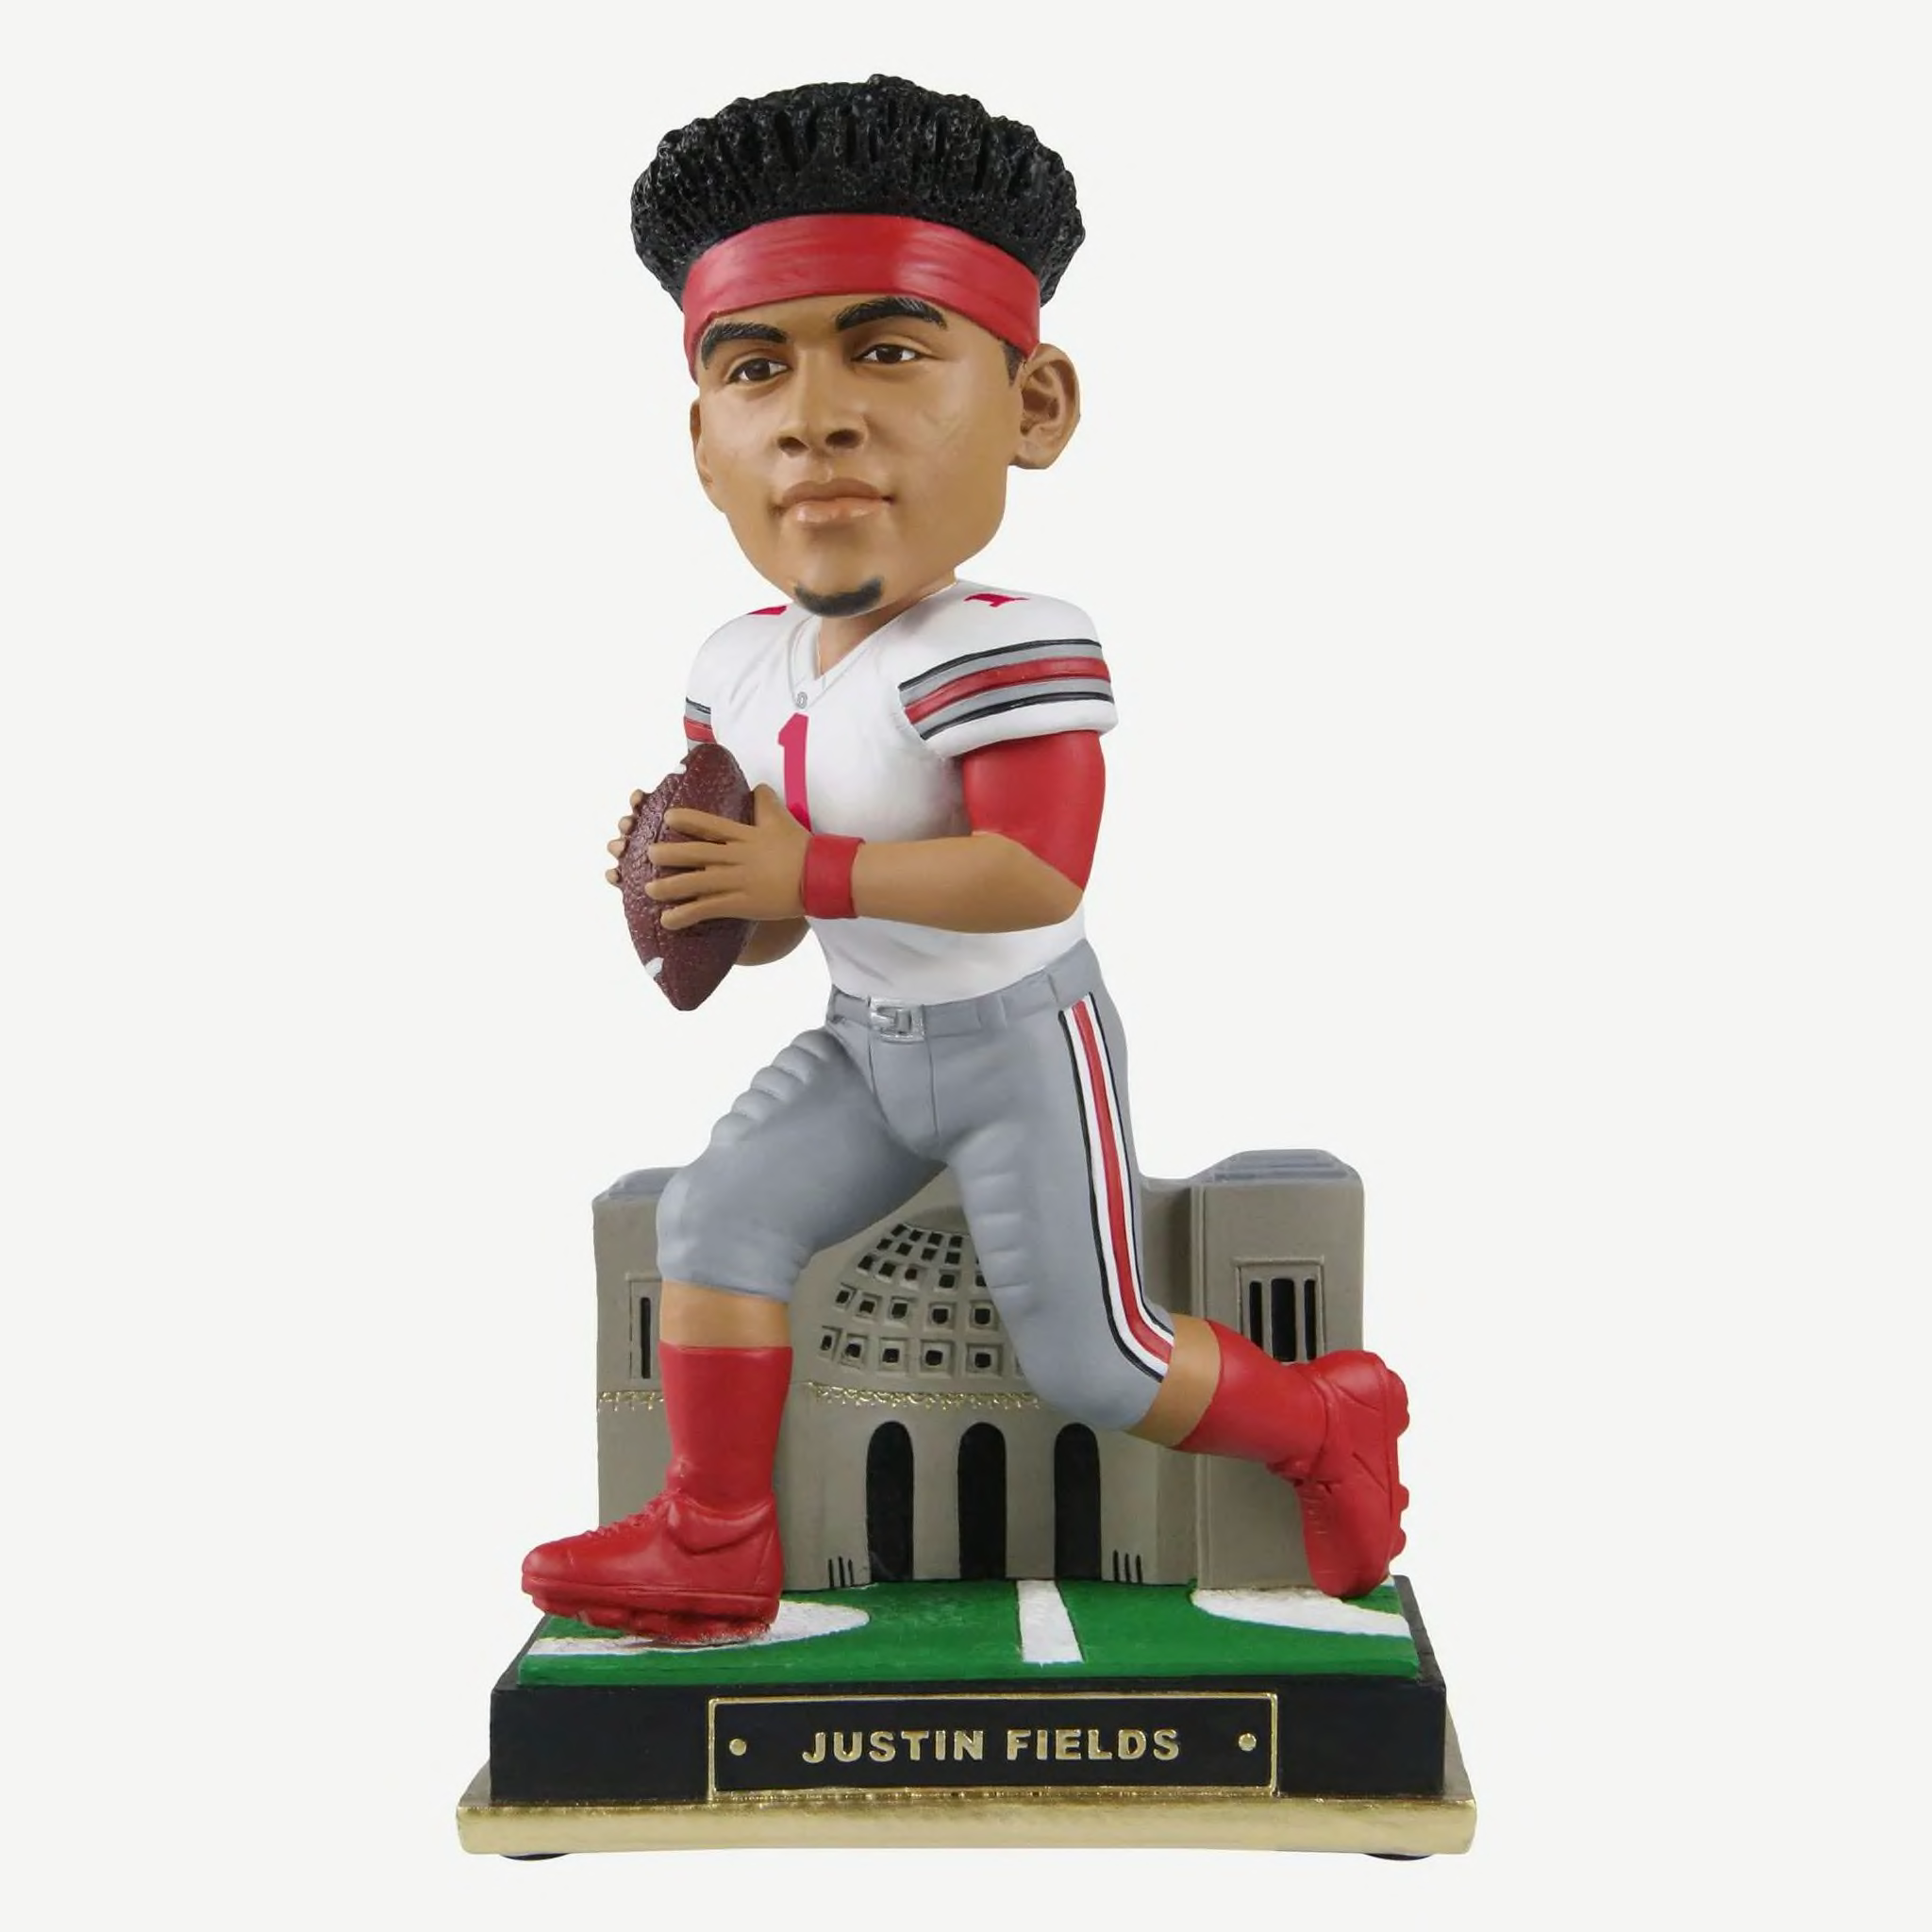 Bowie Baysox - TODAY IS THE FINAL DAY of the 2nd edition of the GREAT  Bobble Head Auction! Bid on Washington Nationals bobble heads through TODAY  9/24 at 4 pm! Auction includes